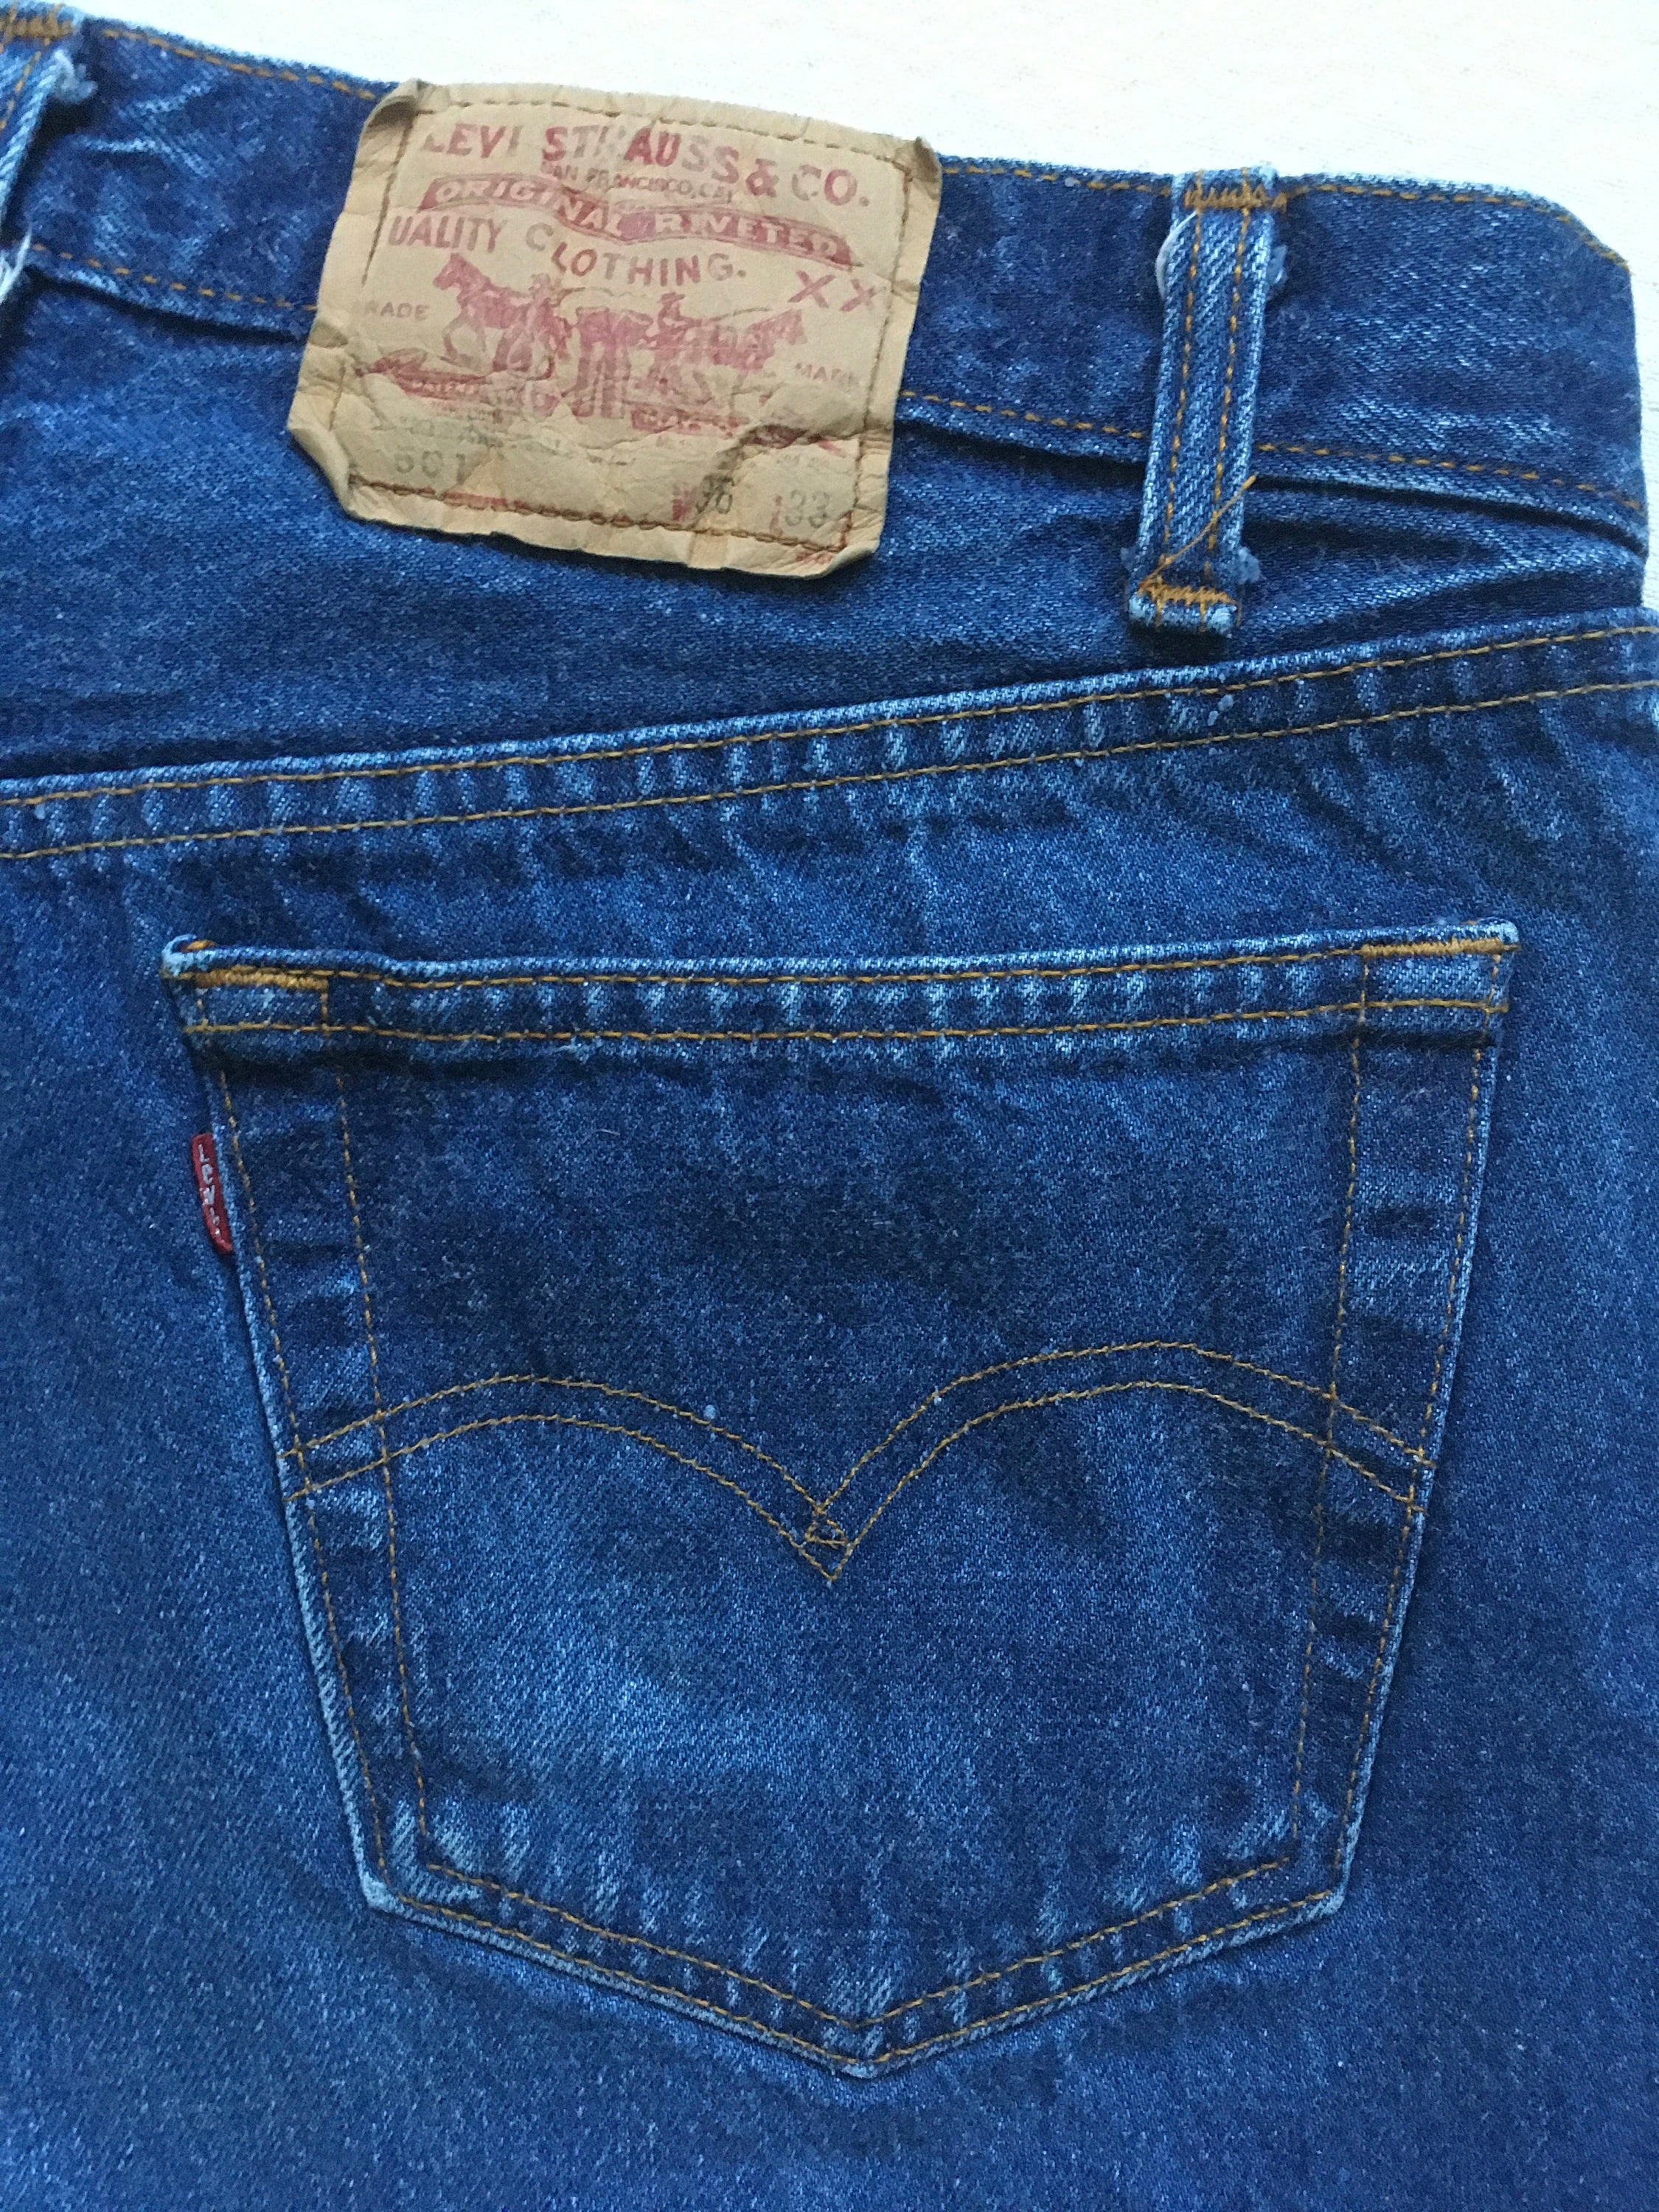 Vintage 80s Levis 501 Made in Usa Daisy Duke Cut off Jean | Etsy